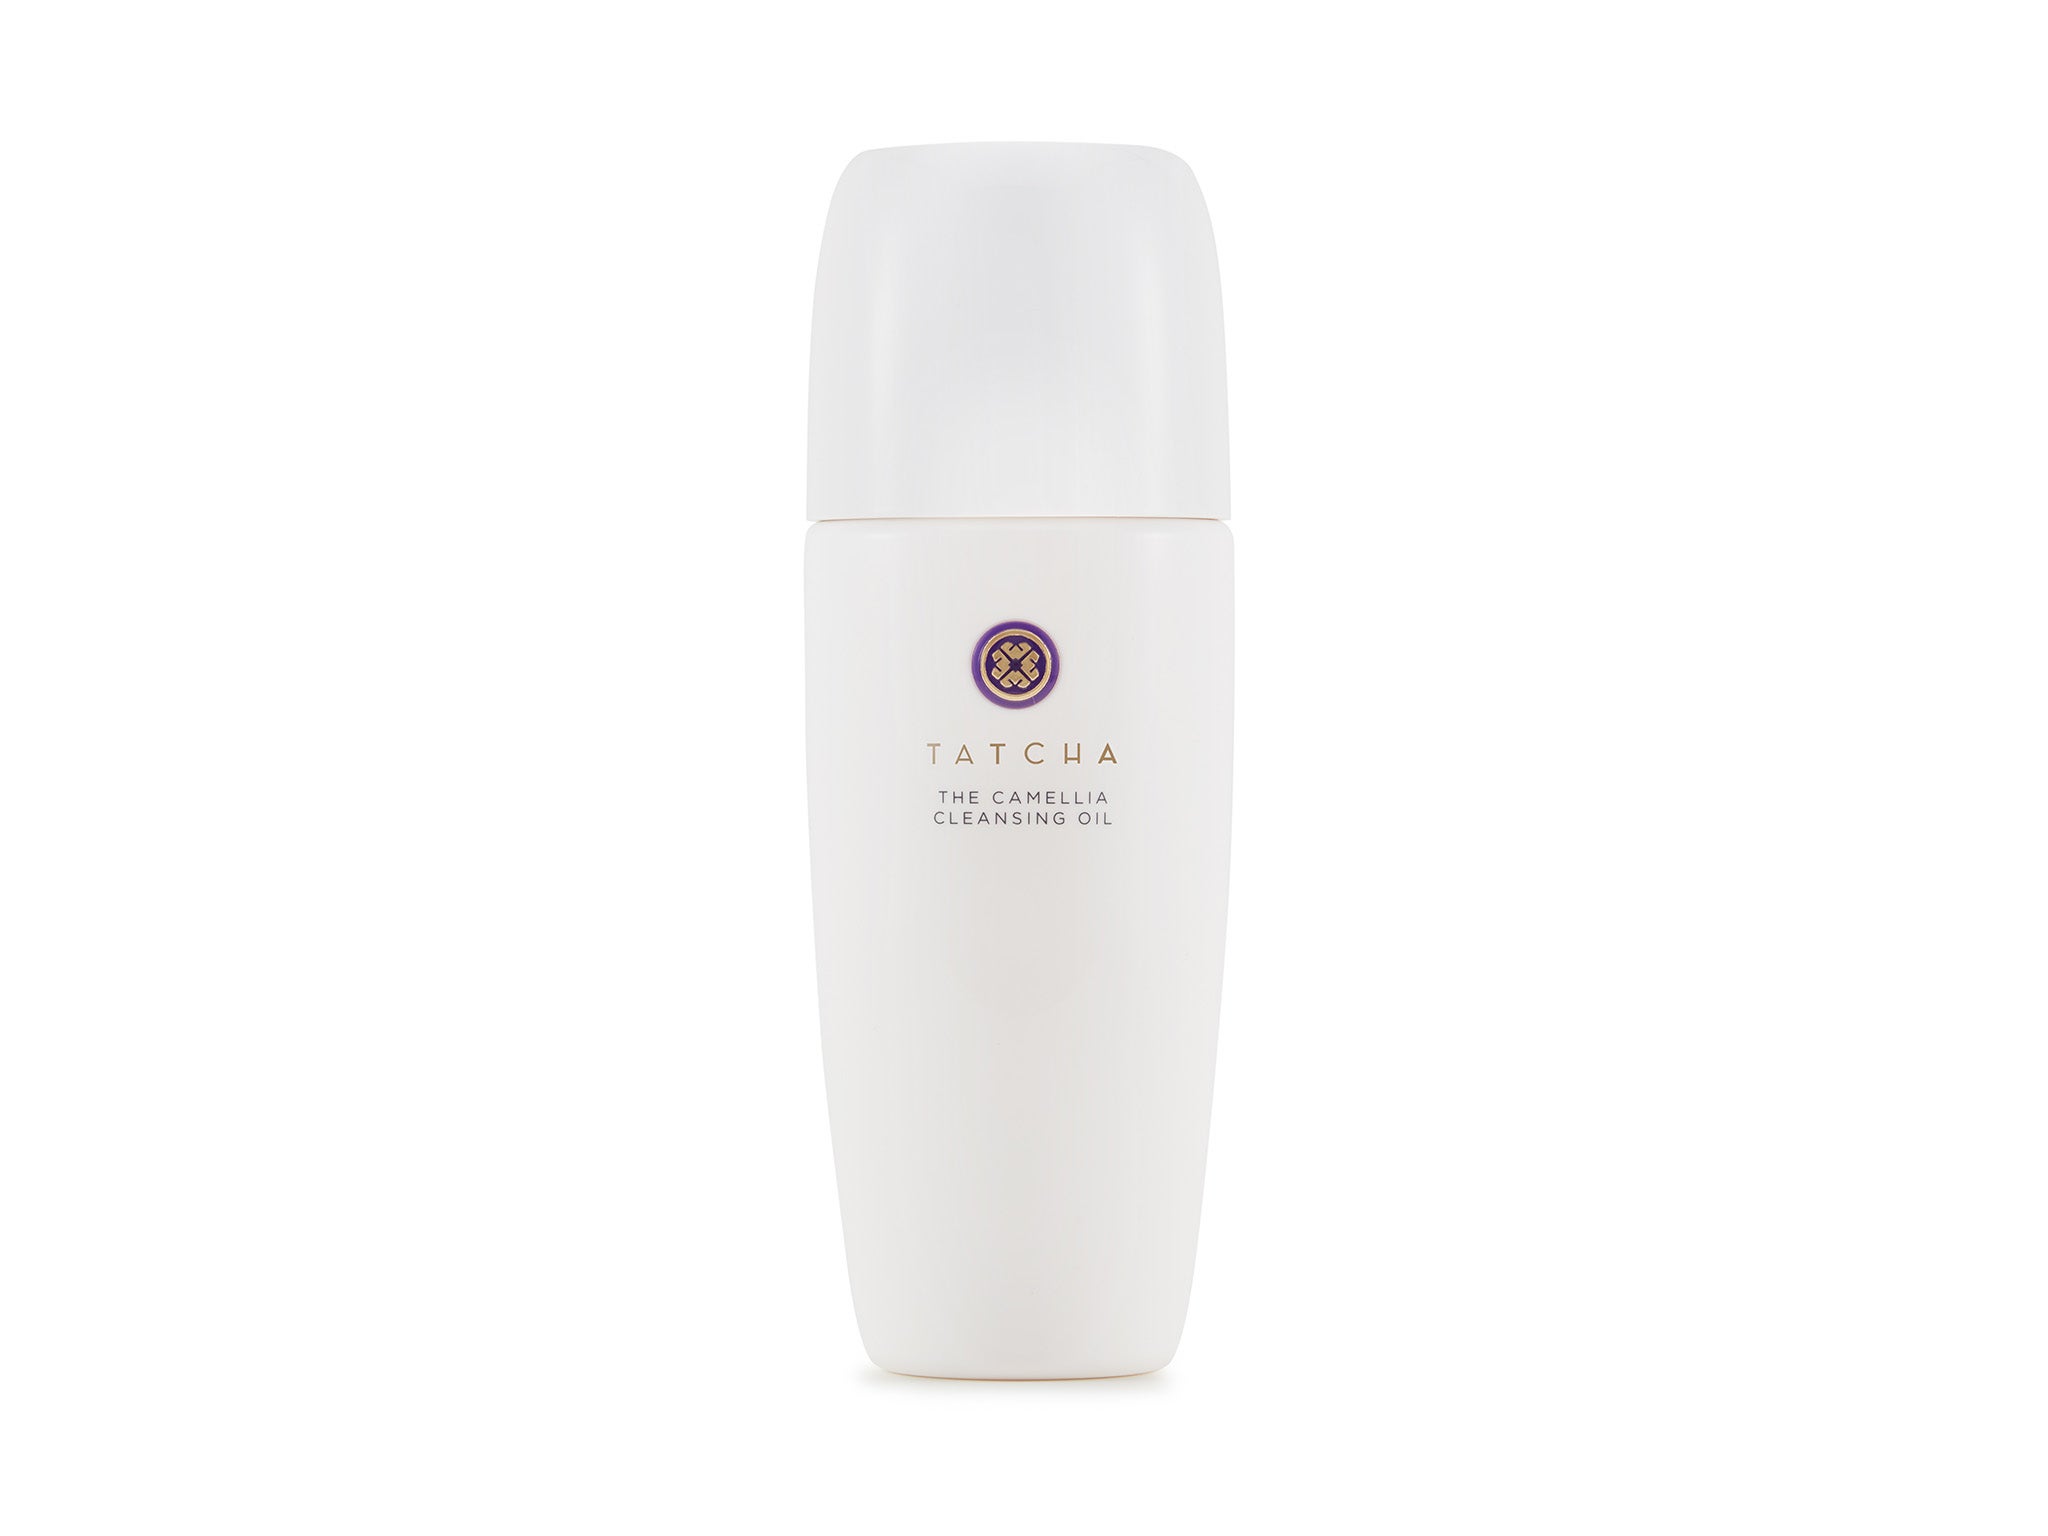 Tatcha the camellia cleansing oil indybest.jpg